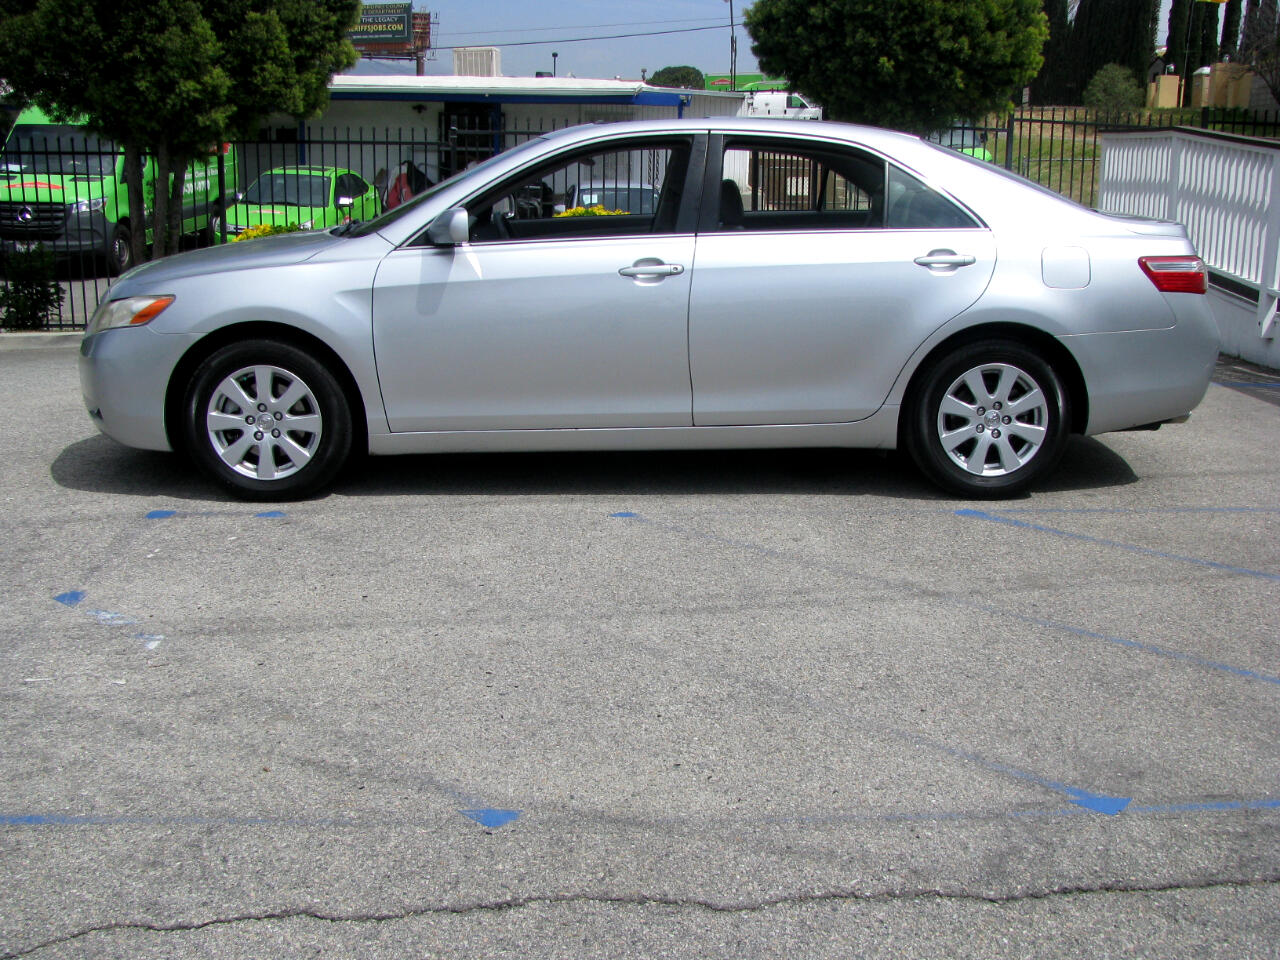 Toyota Camry 4dr Sdn V6 Auto XLE (Natl) 2007